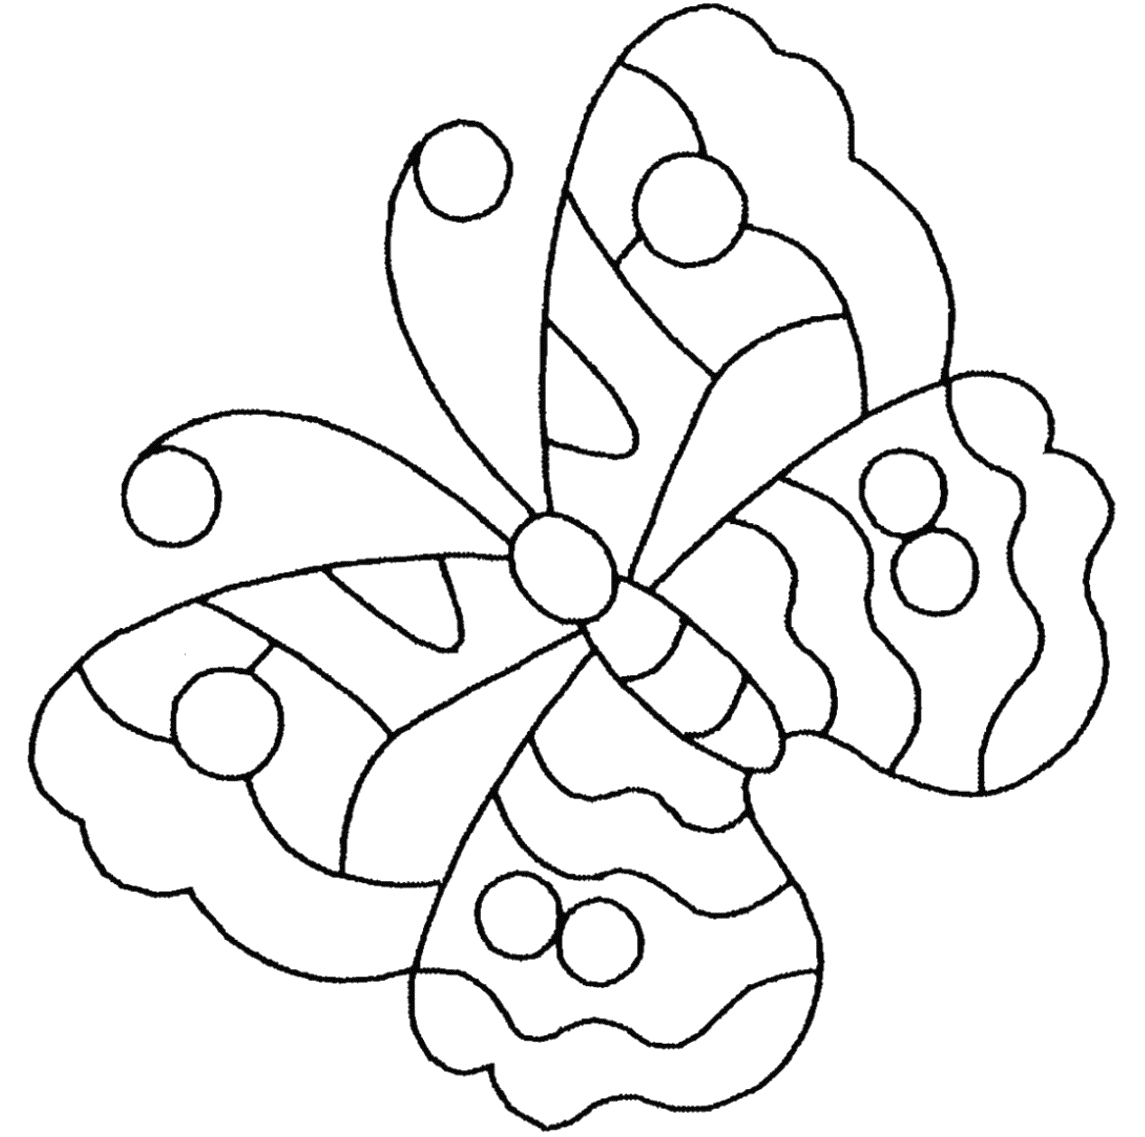 Caterpillar And Butterfly Coloring Page | Coloring Online